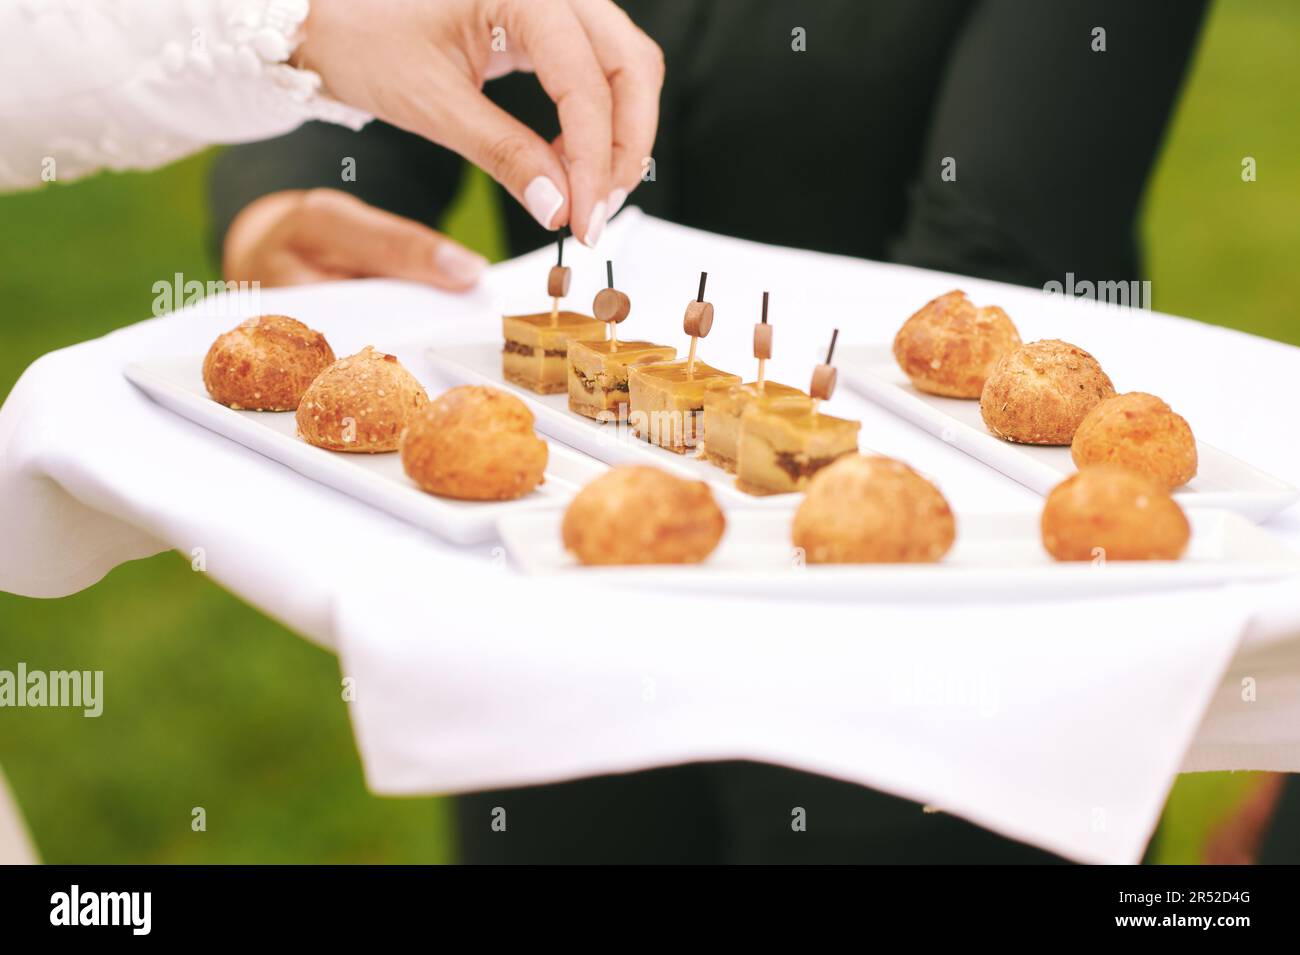 Waiter holding tray with fois gras and mini buns, catering for events Stock Photo